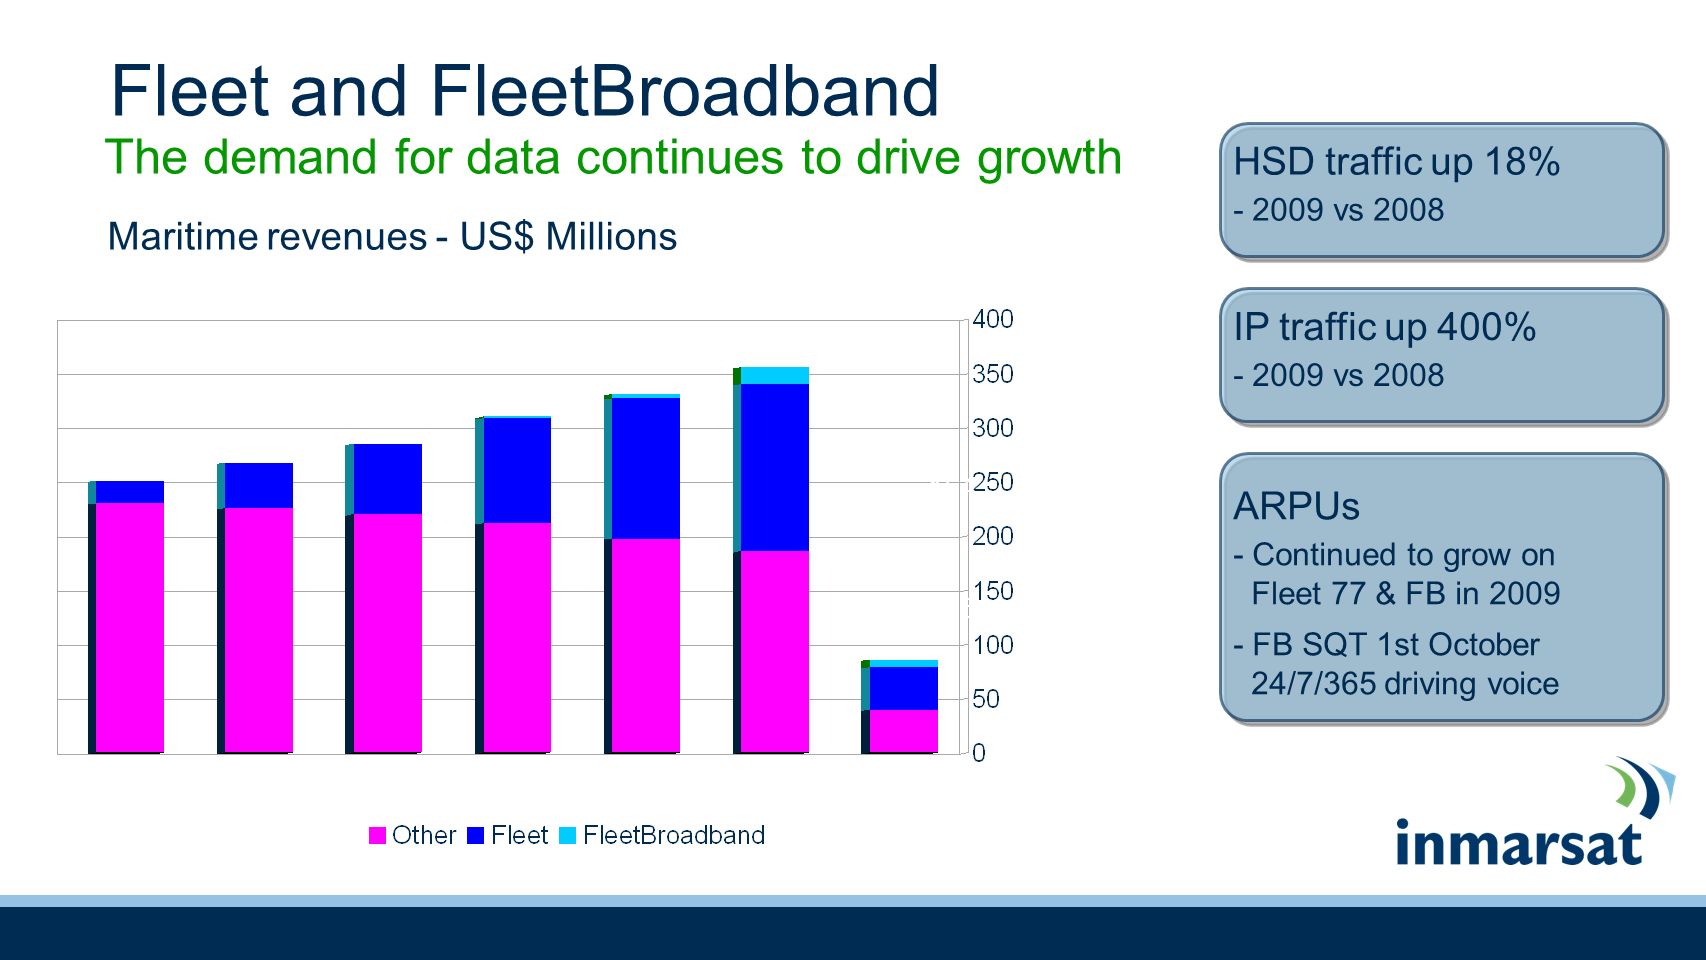 Fleet and FleetBroadband The demand for data continues to drive growth Maritime revenues - US$ Millions HSD traffic up 18% vs 2008 ARPUs - Continued to grow on Fleet 77 & FB in FB SQT 1st October 24/7/365 driving voice IP traffic up 400% vs